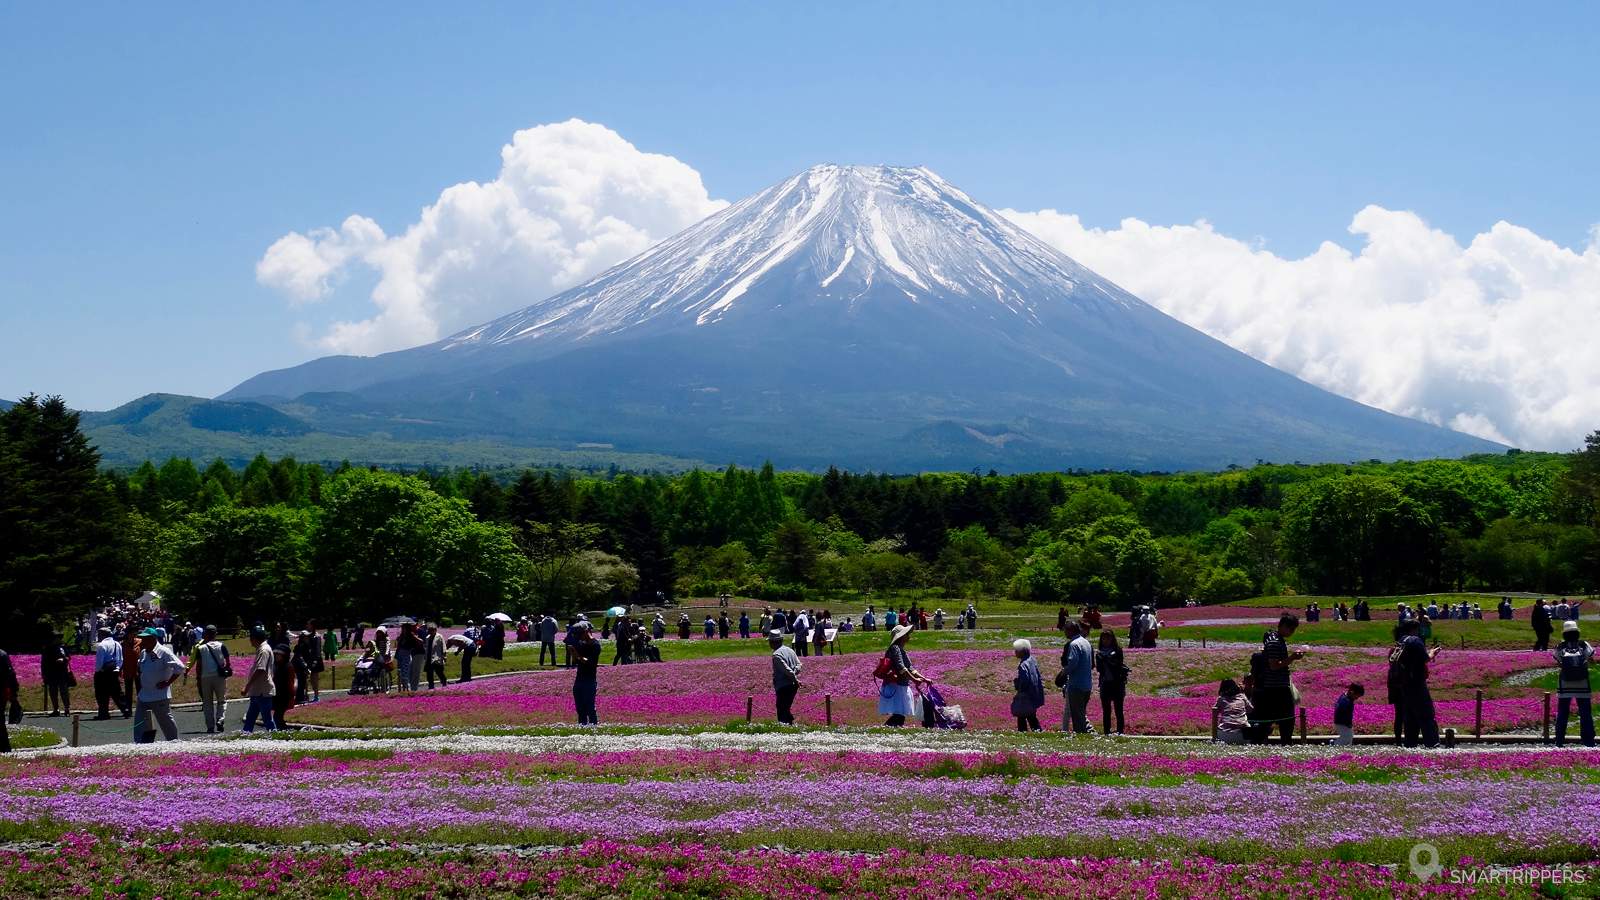 The Fuji Shibazakura Festival: thousands of flowers at the foot